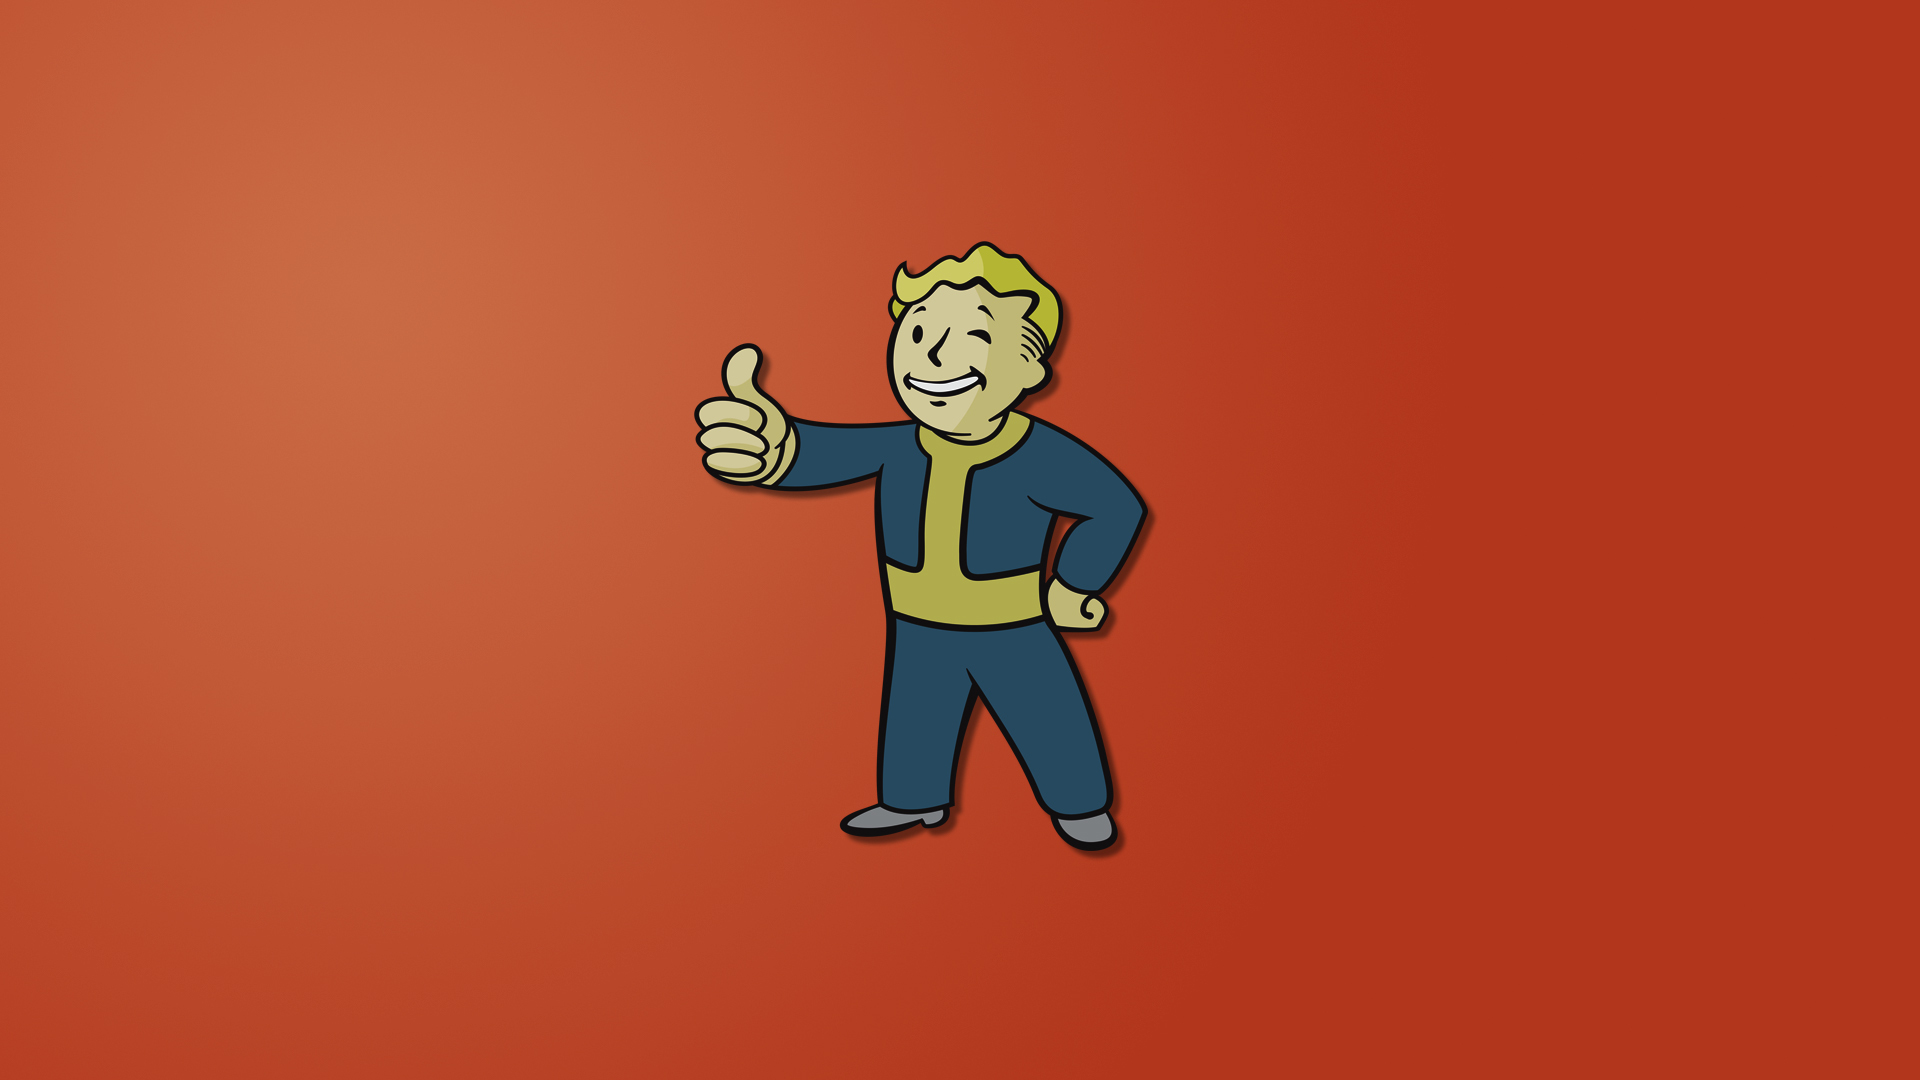 558708 1920x1080 fallout wallpaper android JPG 243 kB - Rare Gallery HD  Wallpapers